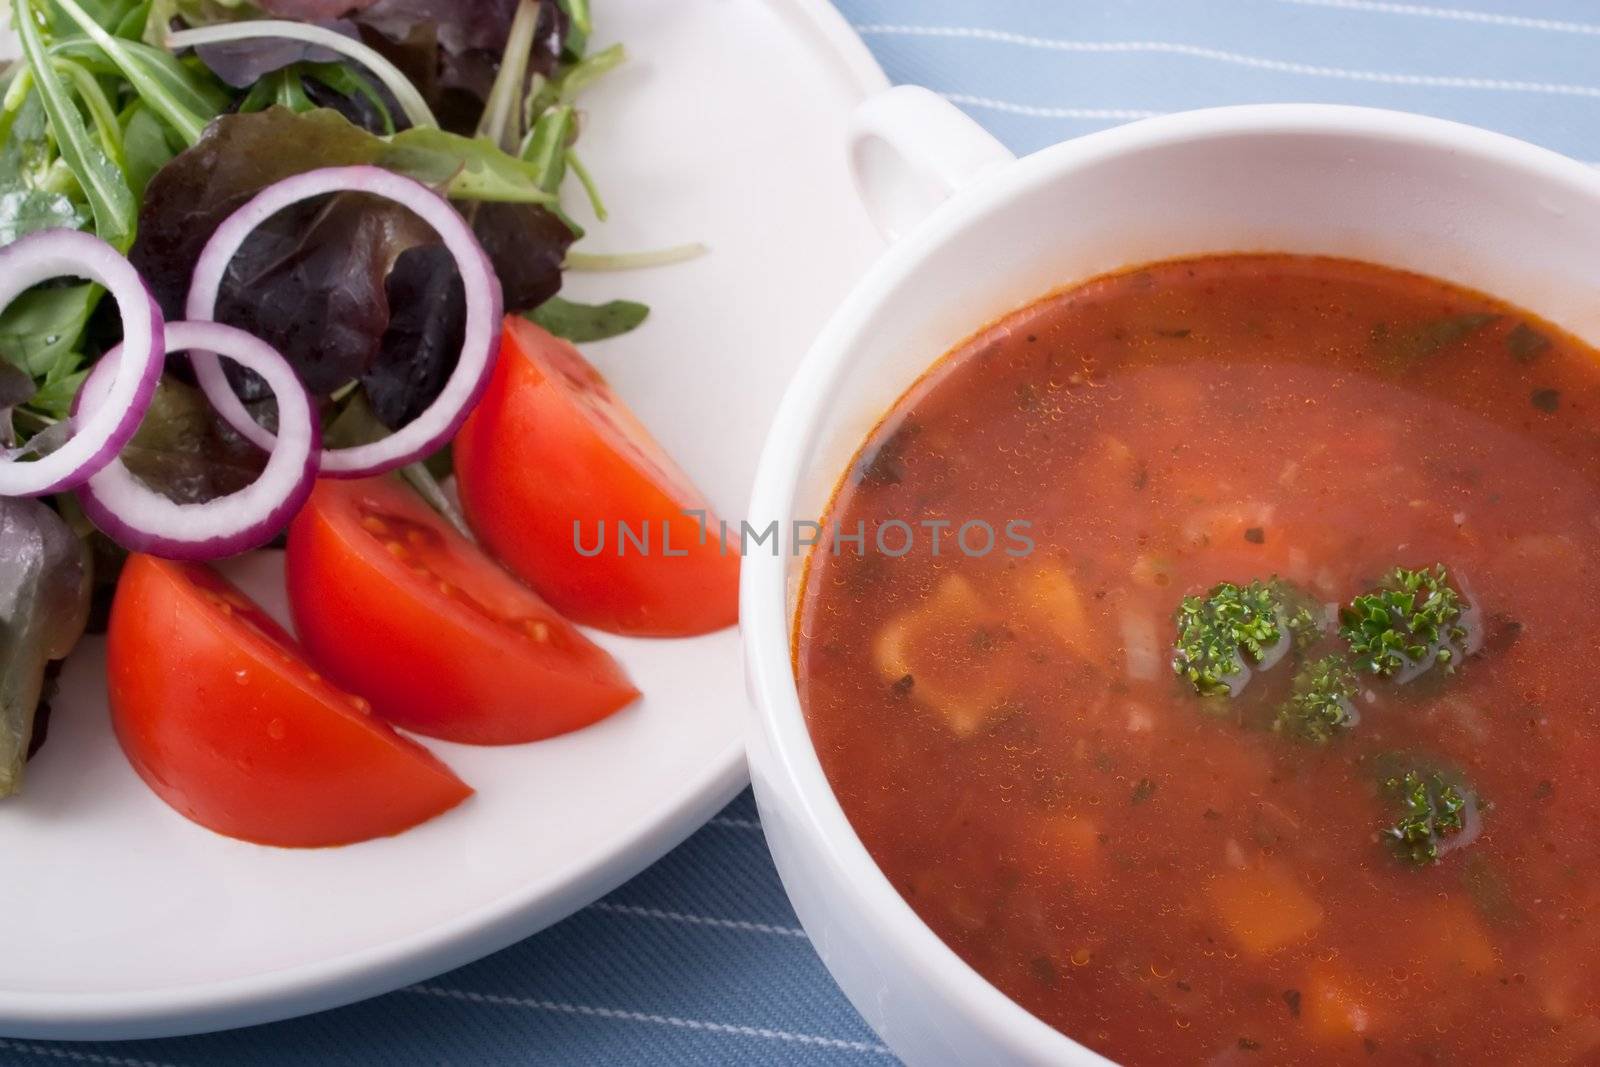 Minestrone soup and a side salad with greens onions and tomatoes for a great low calorie and nutritious lunch.